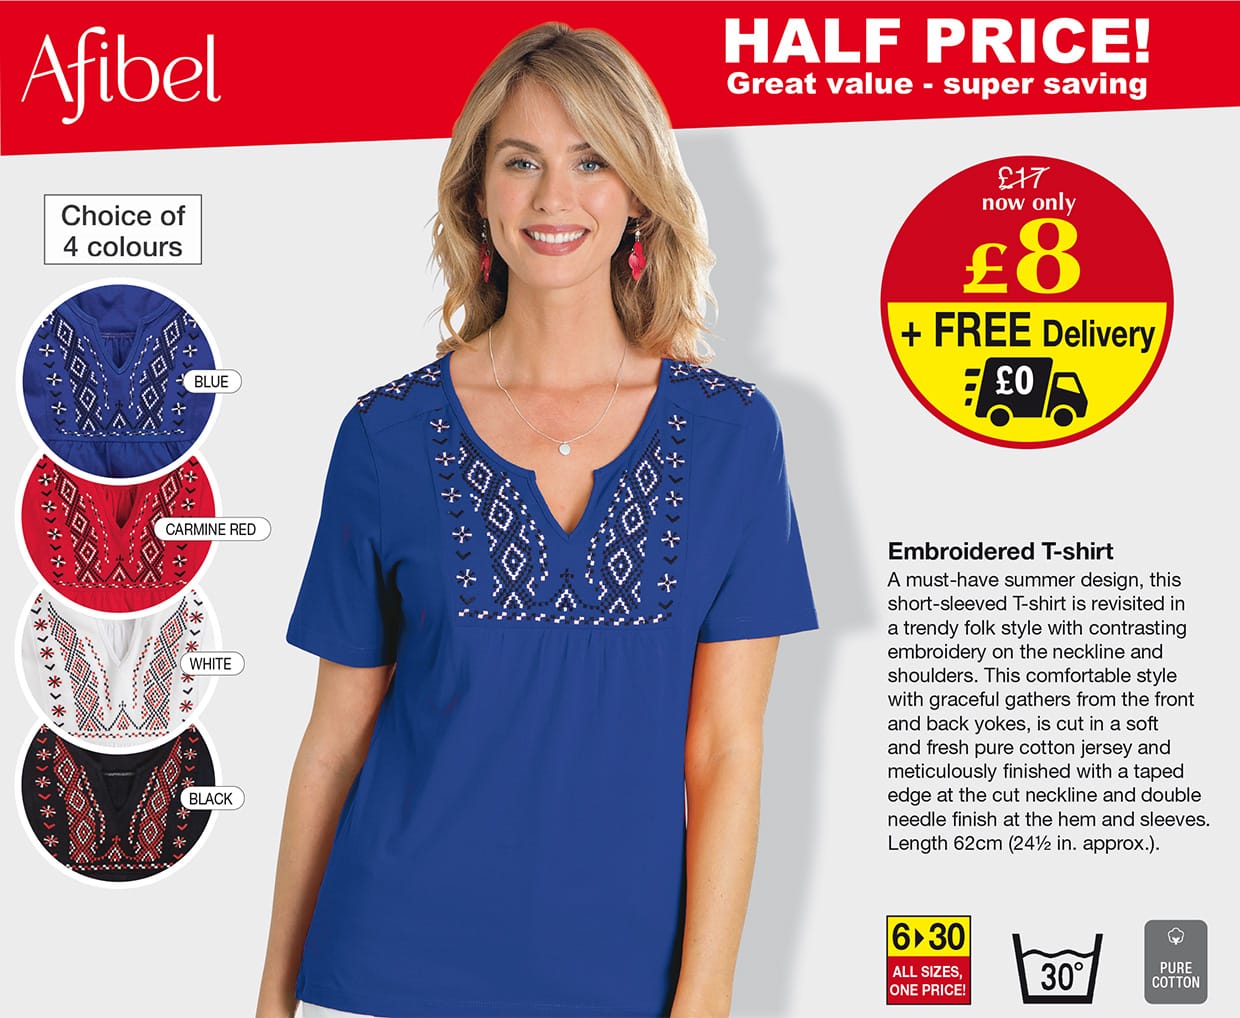 BESTSELLER - Embroidered T-shirt: Half Price, was £17, now only £8 + free delivery